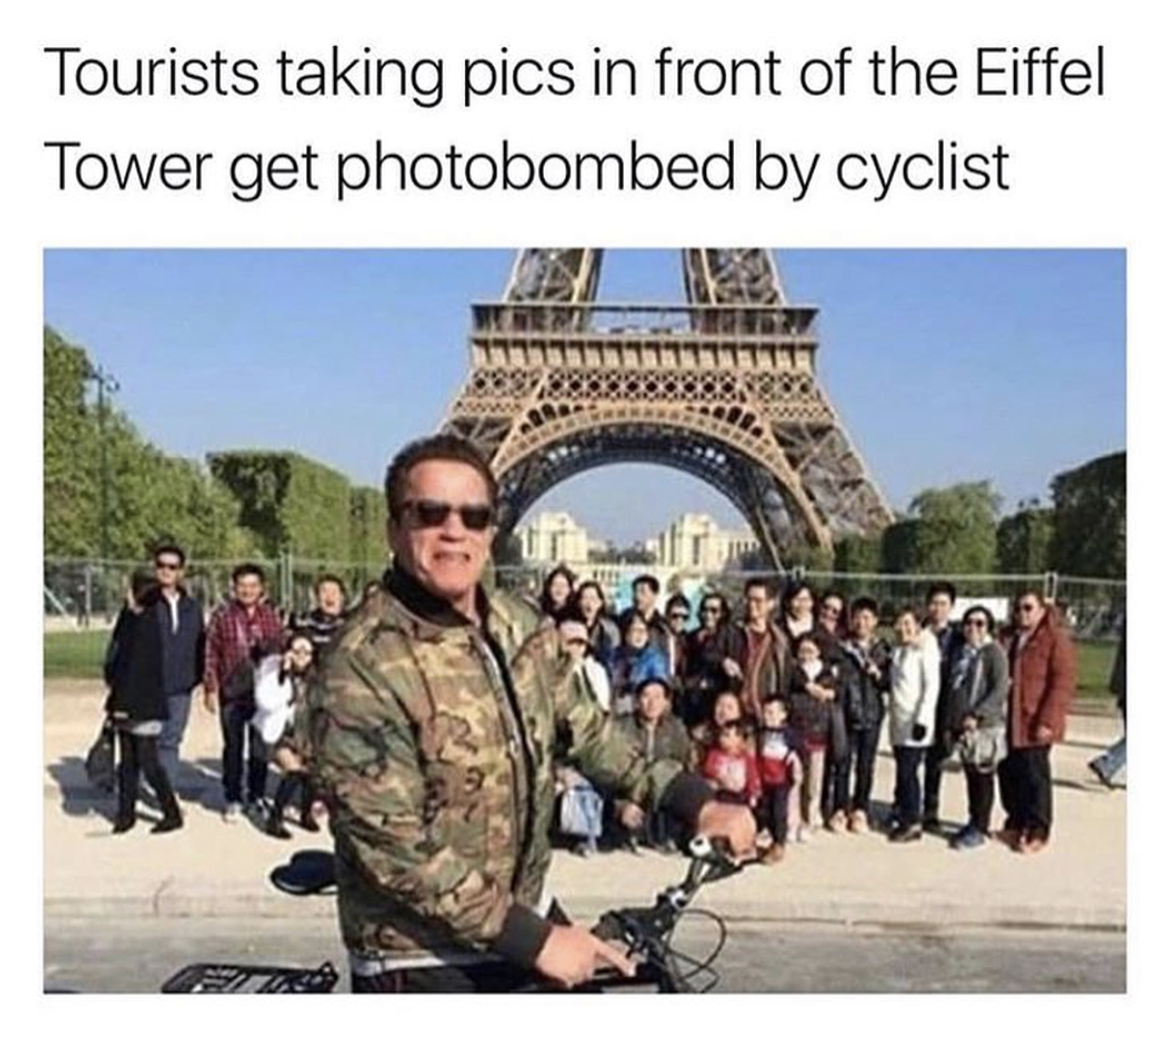 eiffel tower funny pictures memes - Tourists taking pics in front of the Eiffel Tower get photobombed by cyclist VODAHOOOOO333